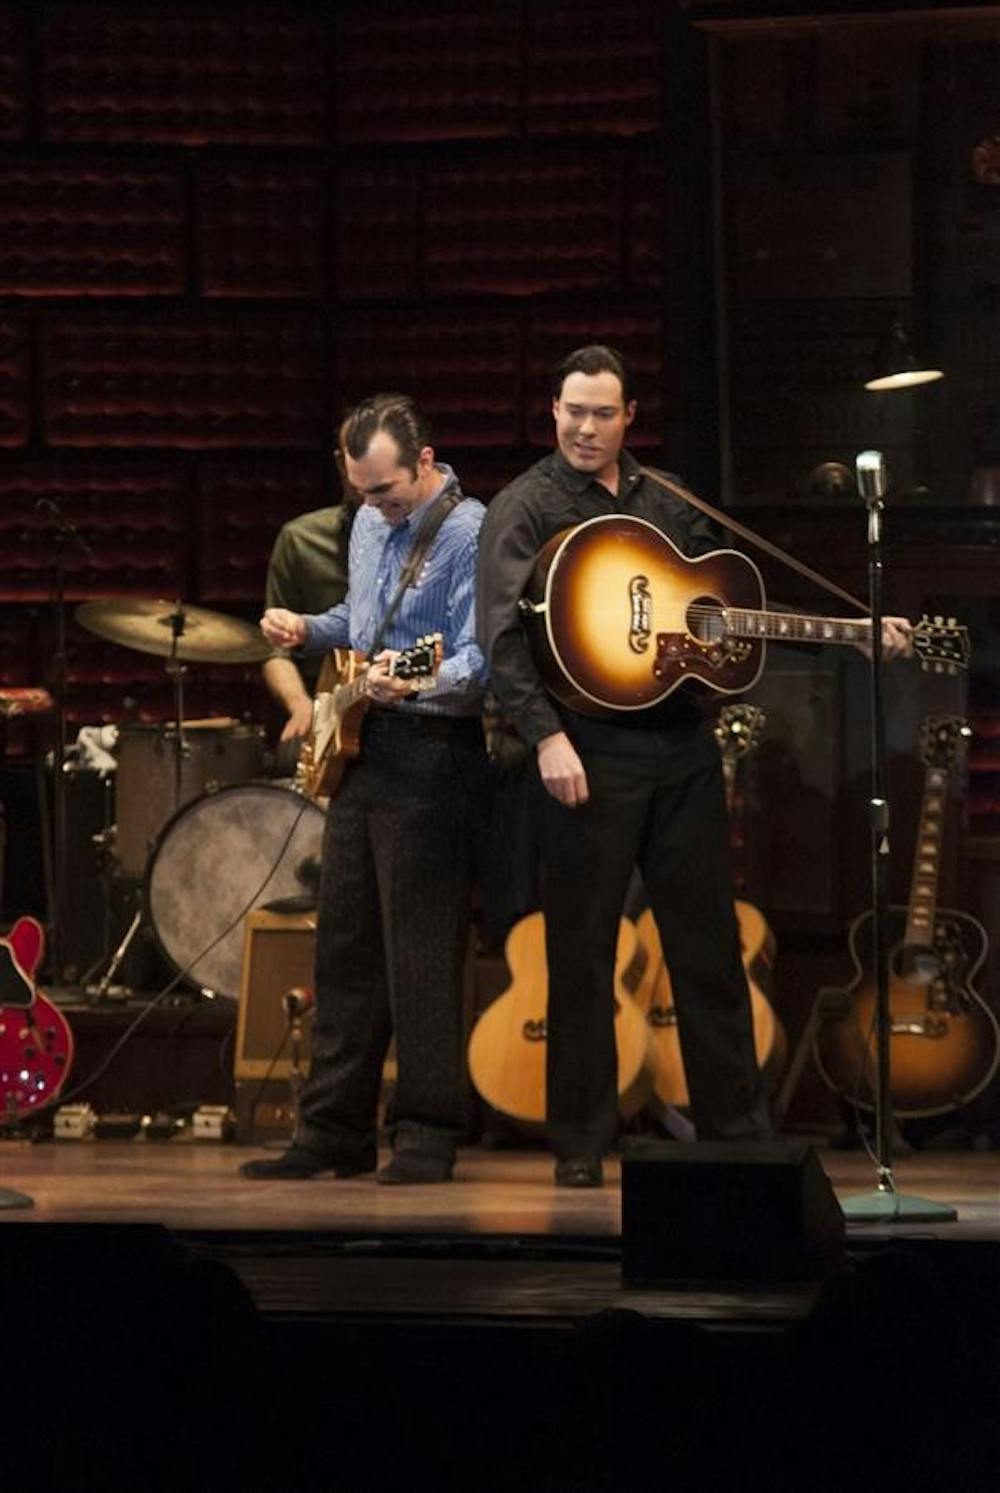 Carl Perkins, played by James Barry, and Johnny Cash, played by Scott Moreau, finish performing "Folsom Prison Blues" during the "Million Dollar Quartet" on Tuesday at the IU Auditorium.